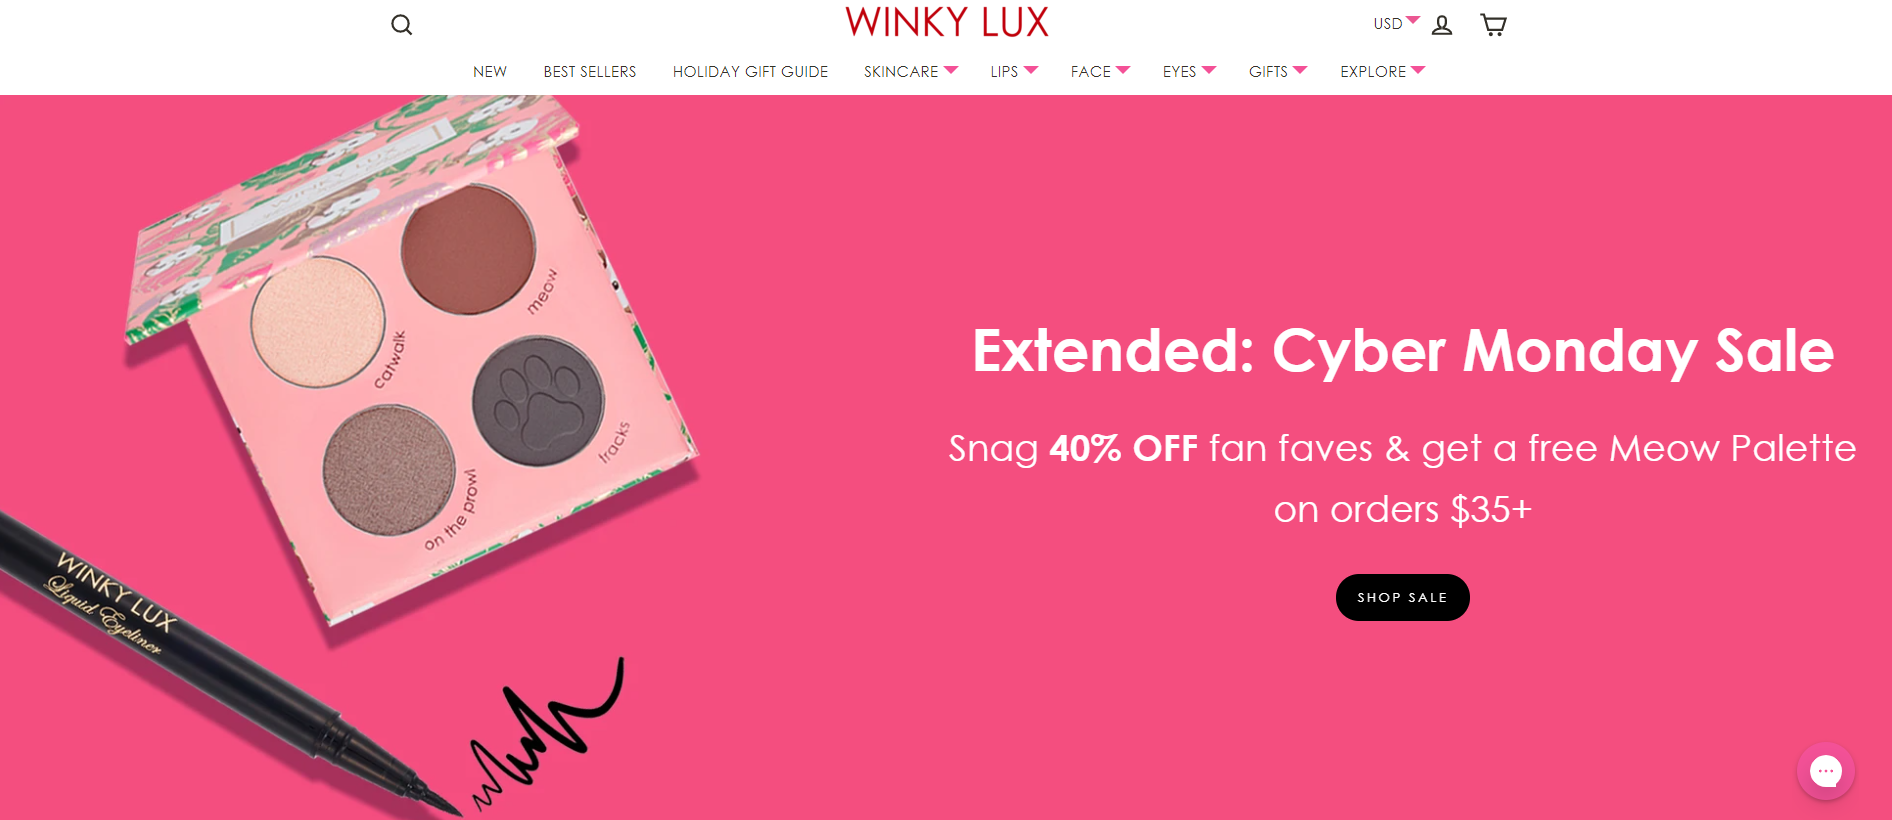 20211201094538 - Winky Lux Cyber Monday 2022